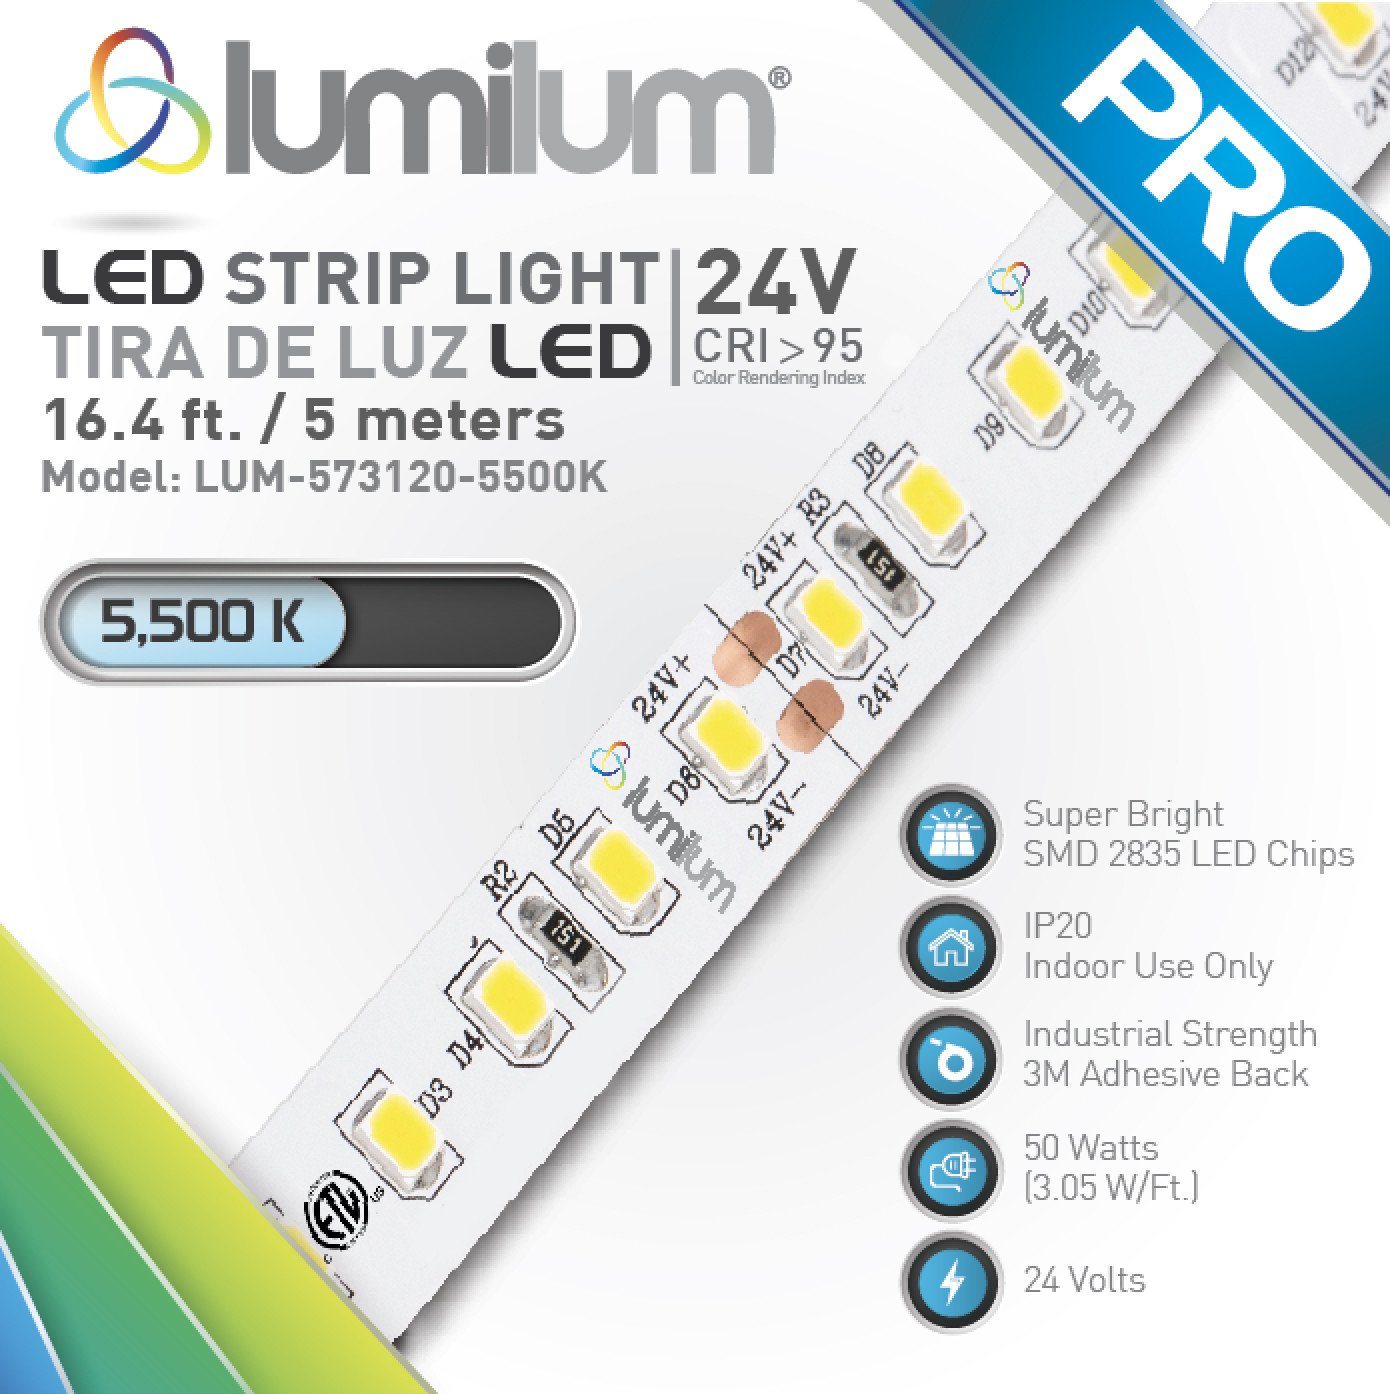 lumilum brand multicolored led strip light packaging face with diagonal strip light with blue PRO text and 5500k color temperature label